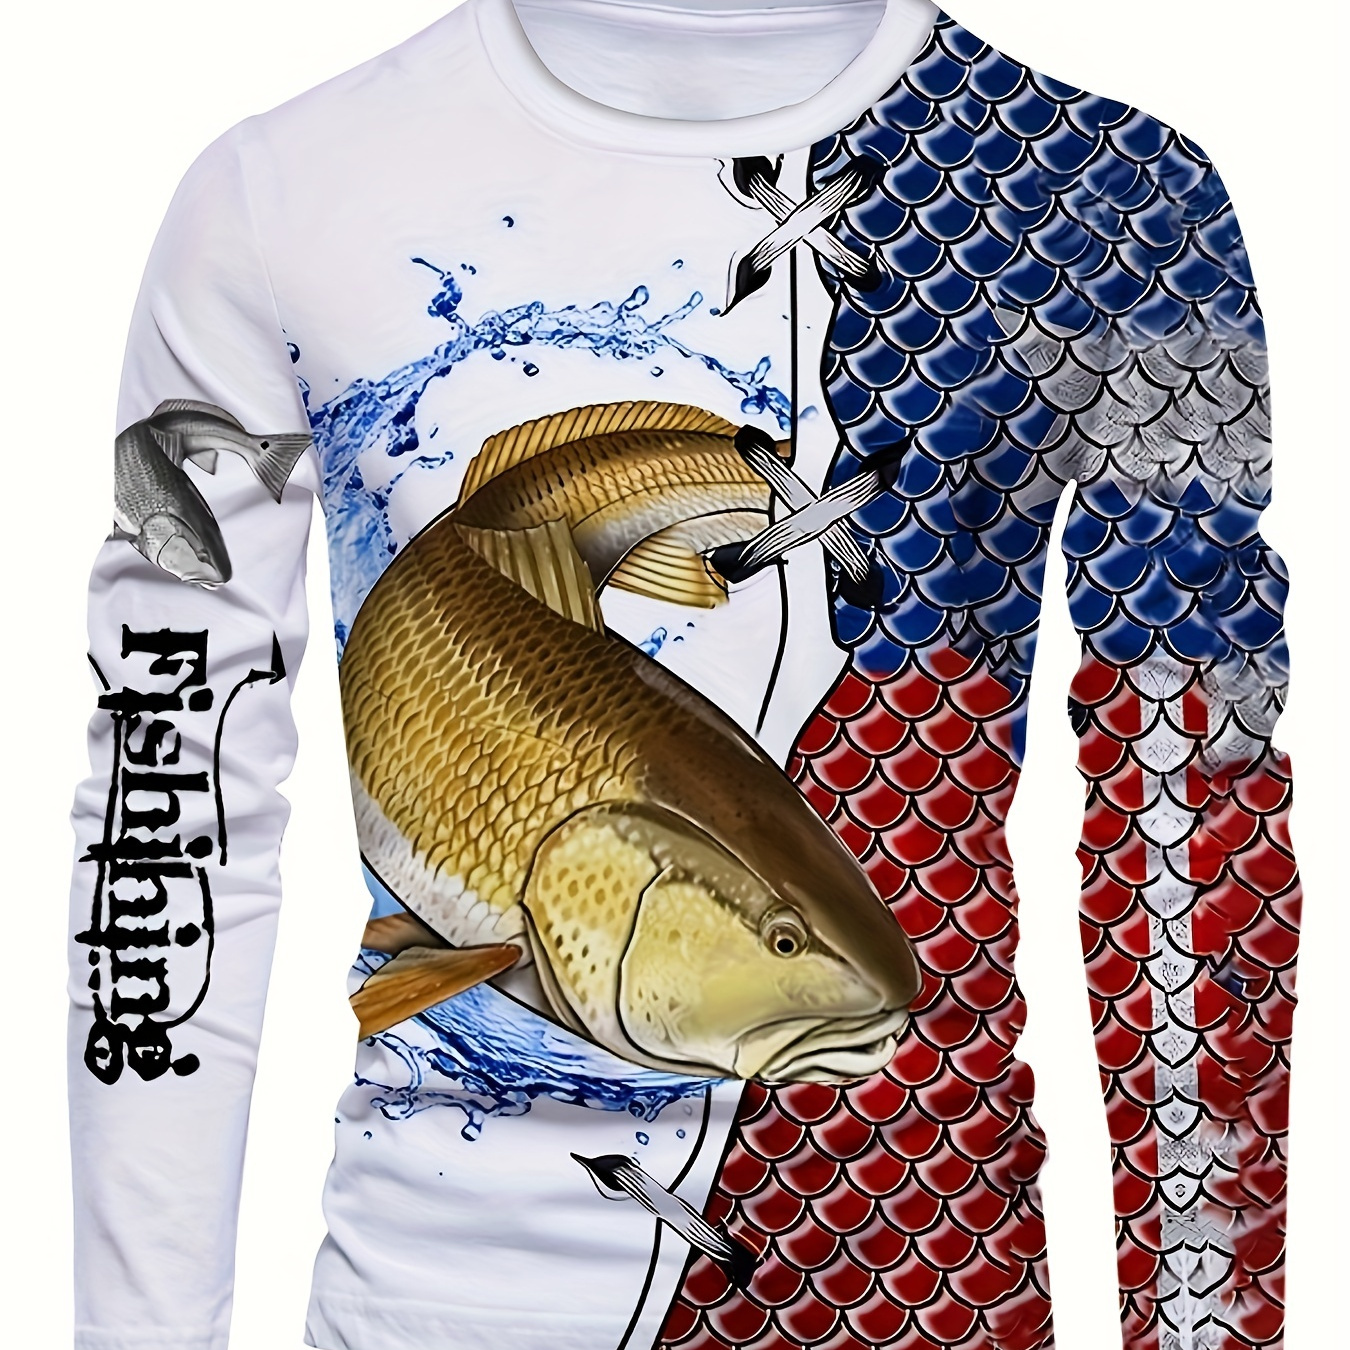 Fish Print Long Sleeve Fishing Shirts & Pants For Men, 2pieces Novelty Pjs  Tops Pullovers Tops & Trousers Set, Men's Trendy Clothing